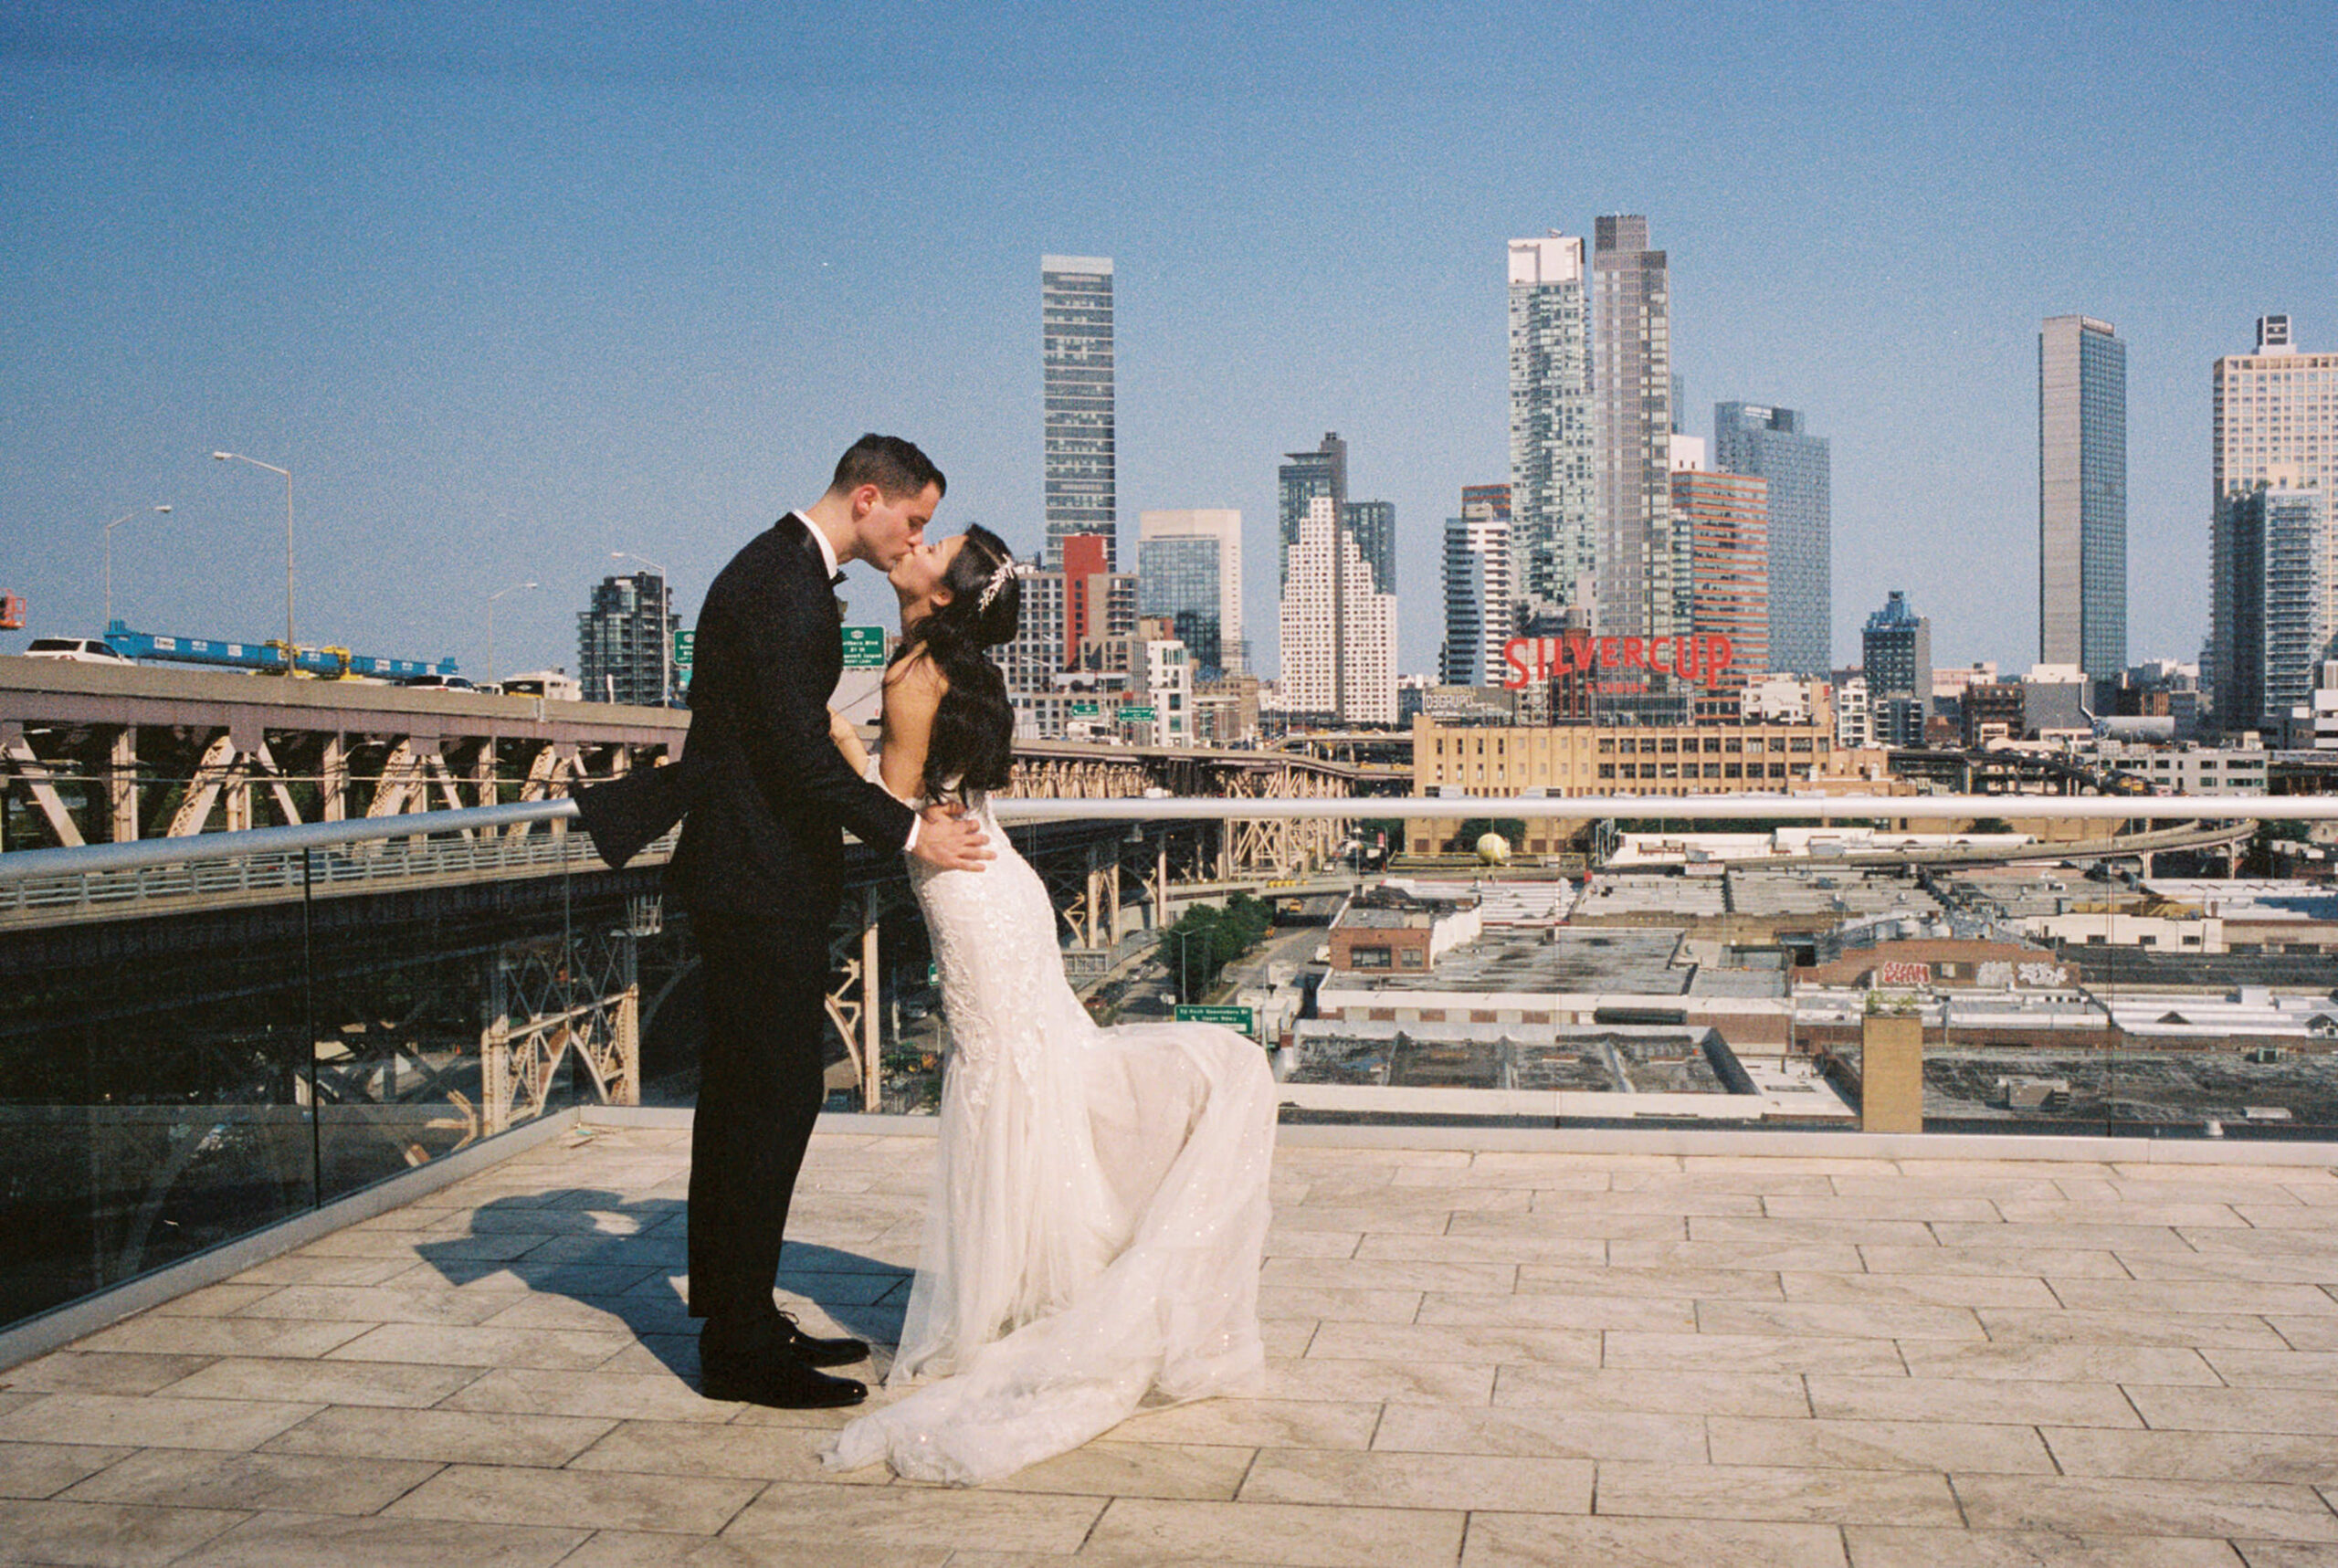 Editorial photo of the bride and groom in NYC with skyscrapers in the background. Film wedding photography image by Jenny Fu Studio